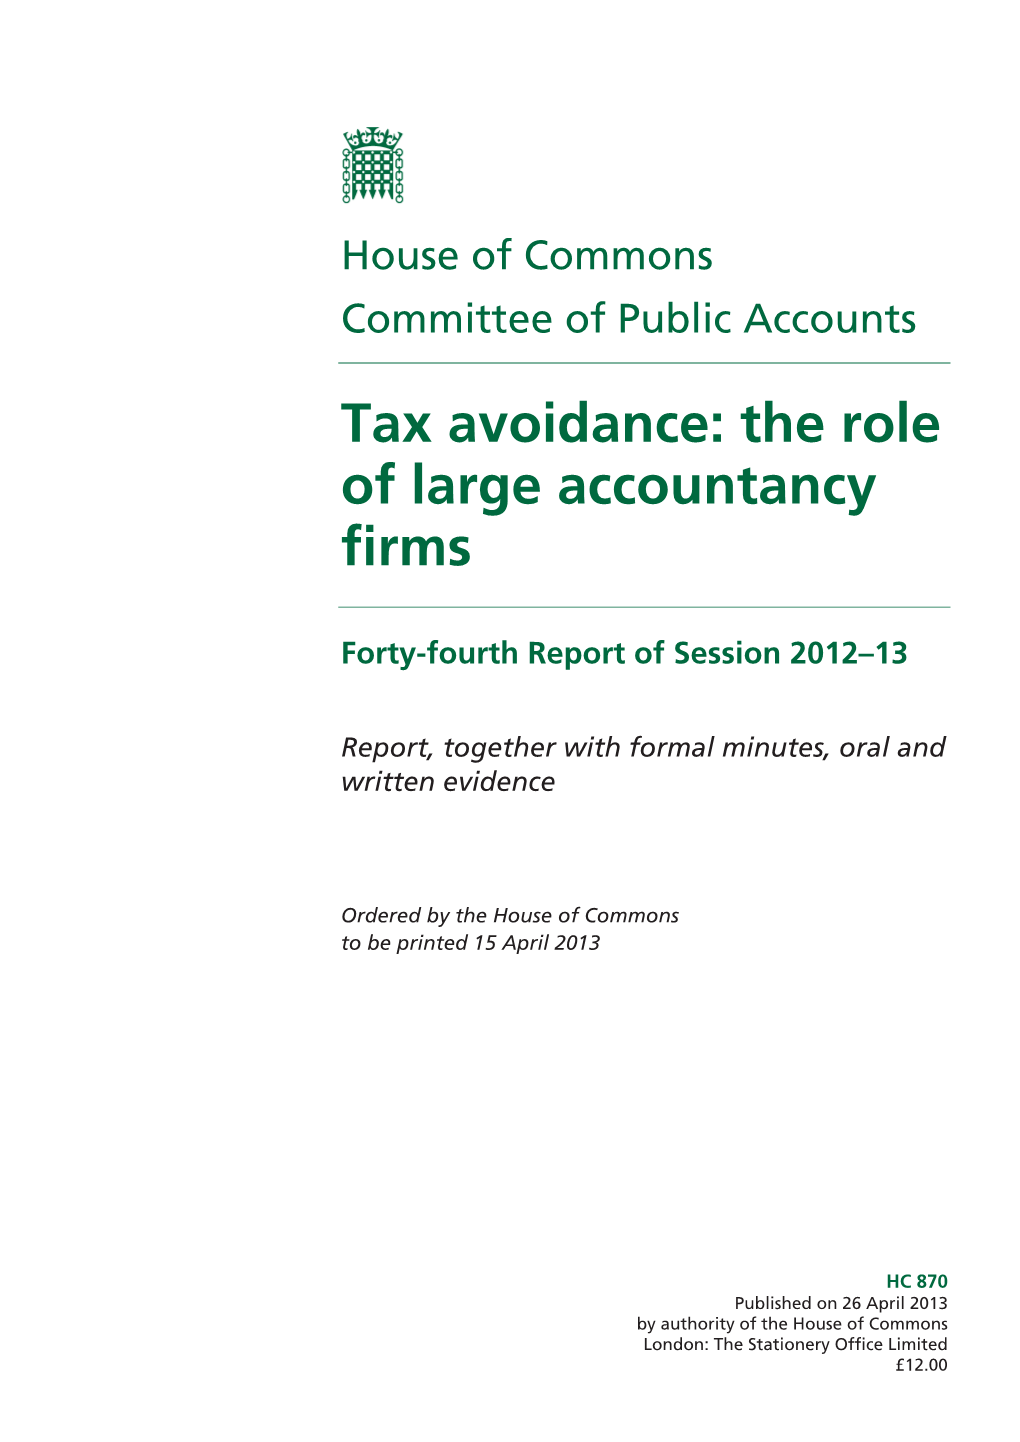 Tax Avoidance: the Role of Large Accountancy Firms